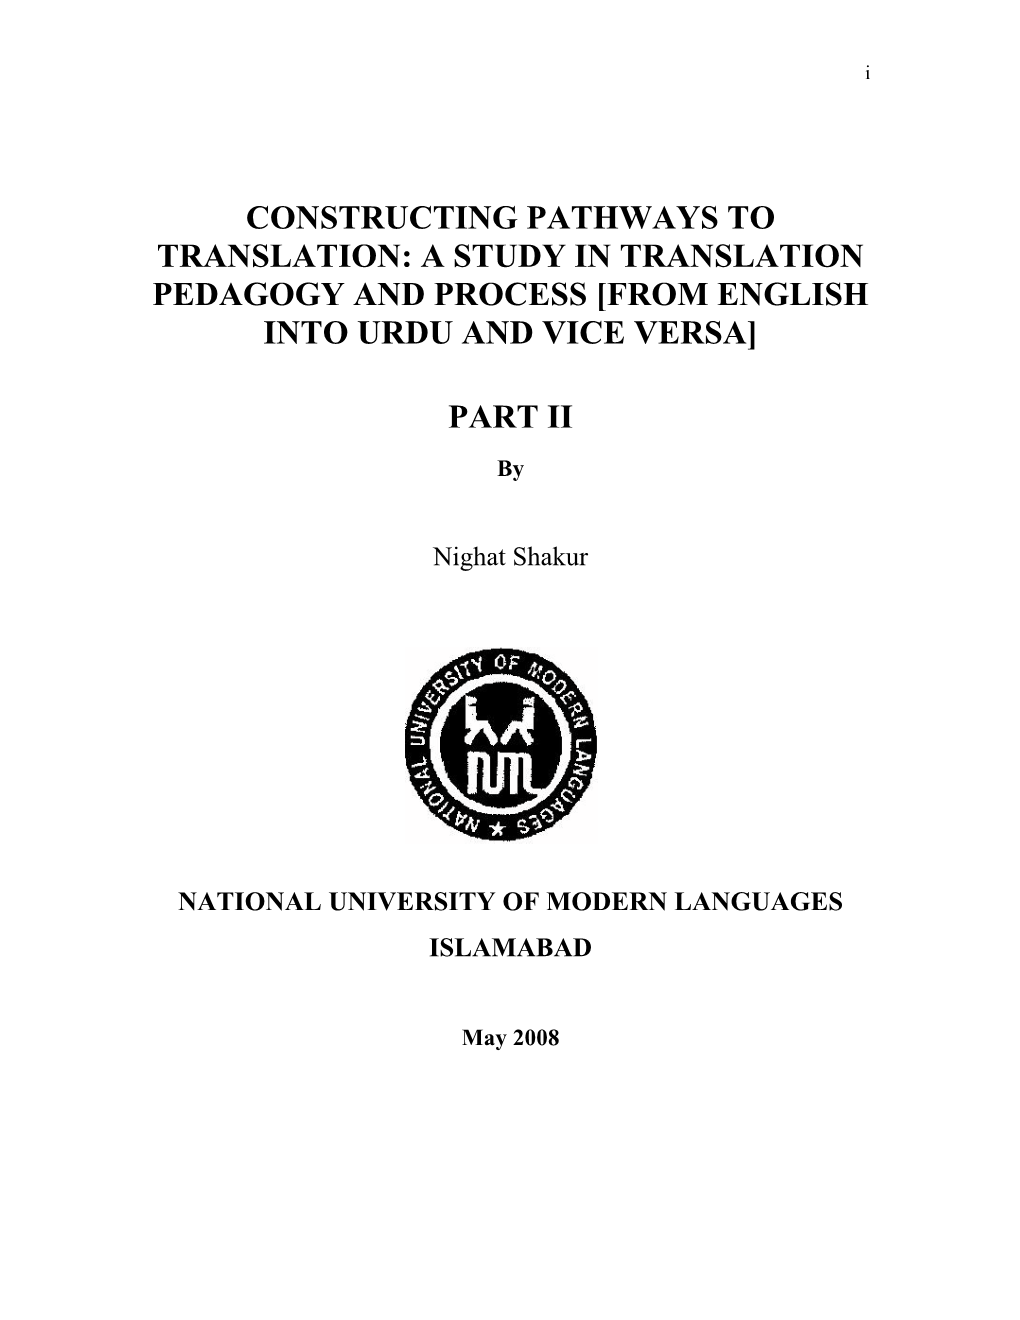 Constructing Pathways to Translation: a Study in Translation Pedagogy and Process [From English Into Urdu and Vice Versa]